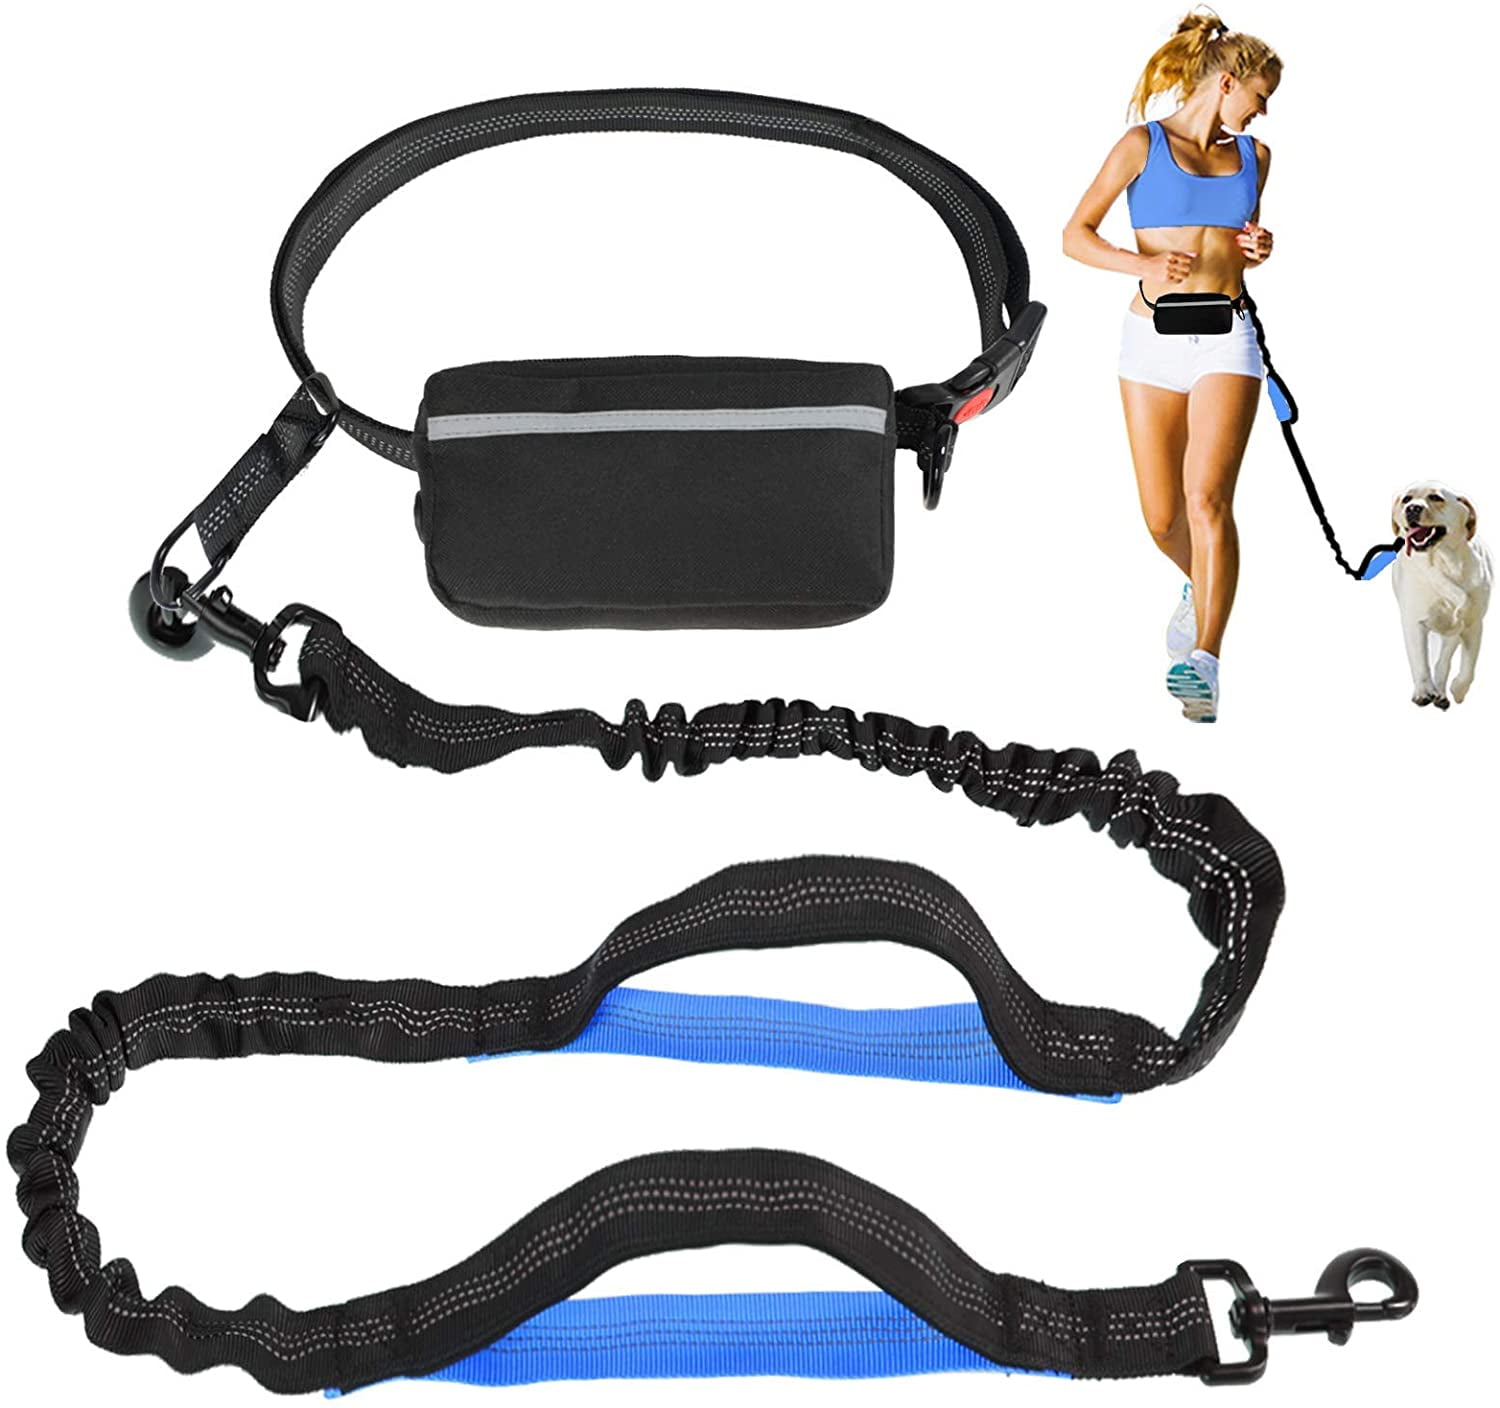 Dual-Handle Reflective Bungee Hands Free Dog Leash for Running Walking Training Hiking Shock Absorbing Ideal for Medium to Large Dogs Black Green Adjustable Waist Belt 